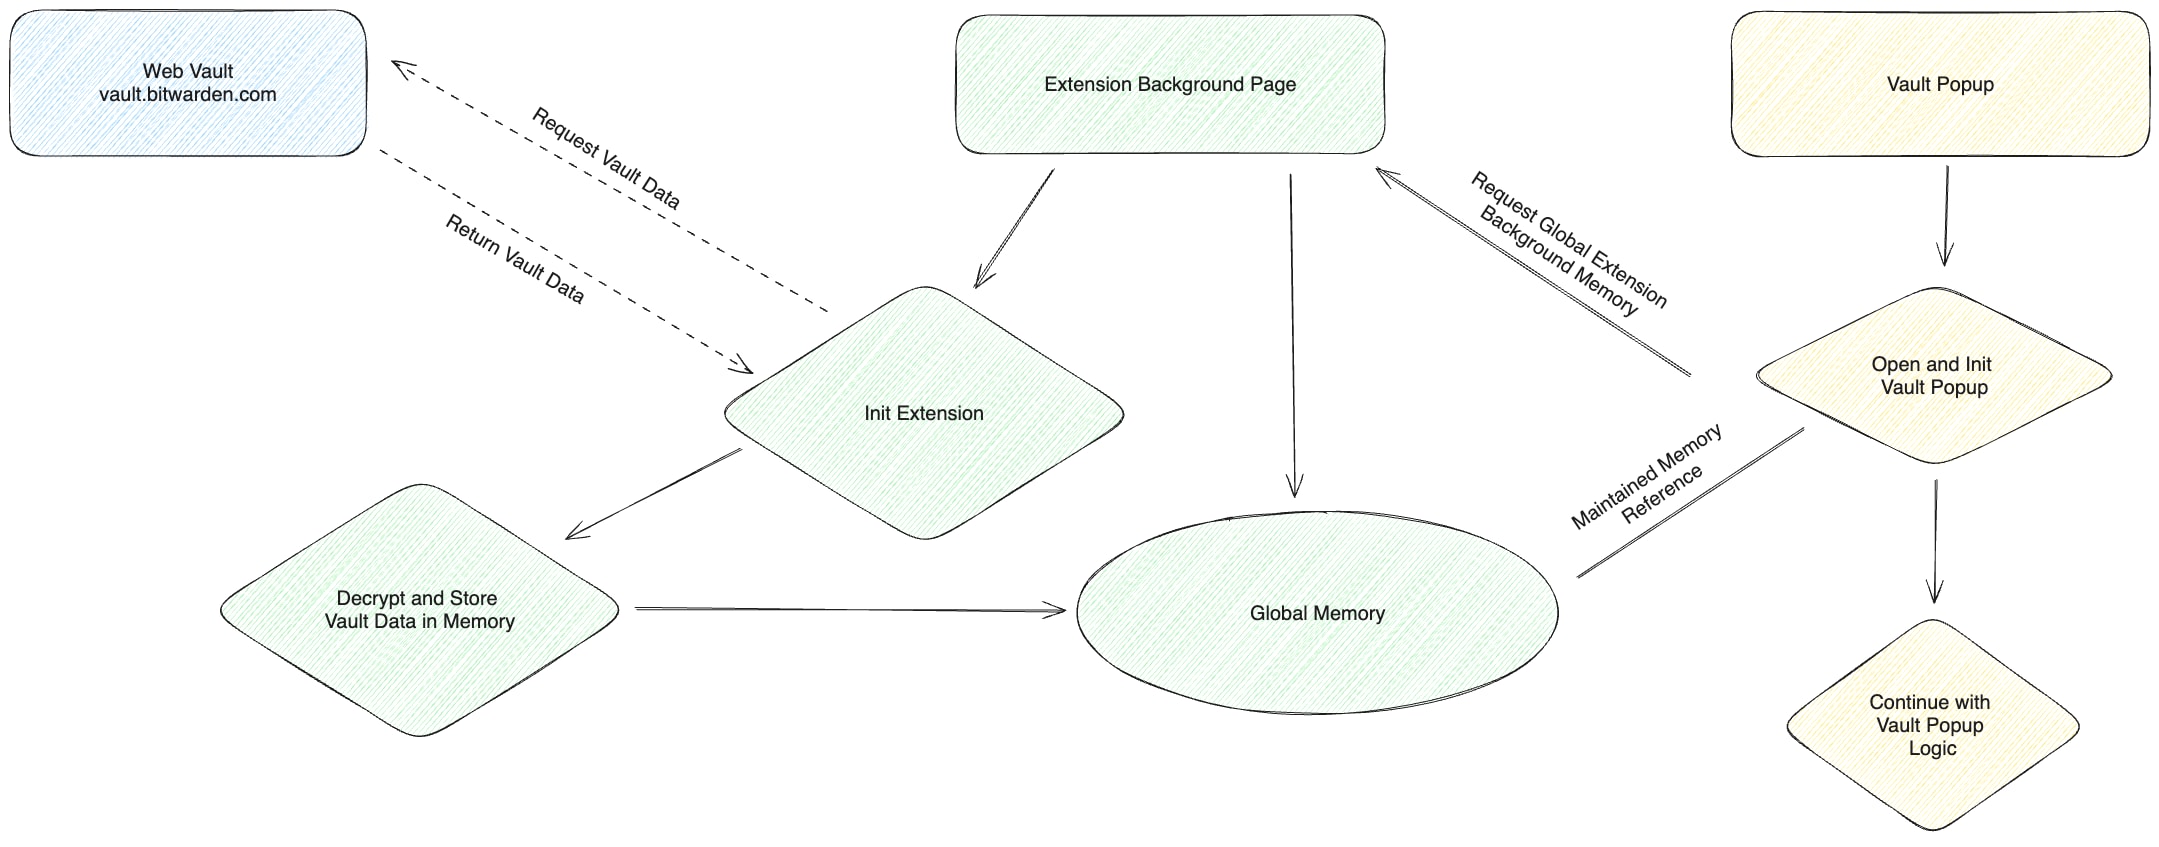 The architecture of Bitwarden manifest v2 extension, and the process in which a shared memory reference between the extension background page and the vault popup allowed the extension to propagate data.